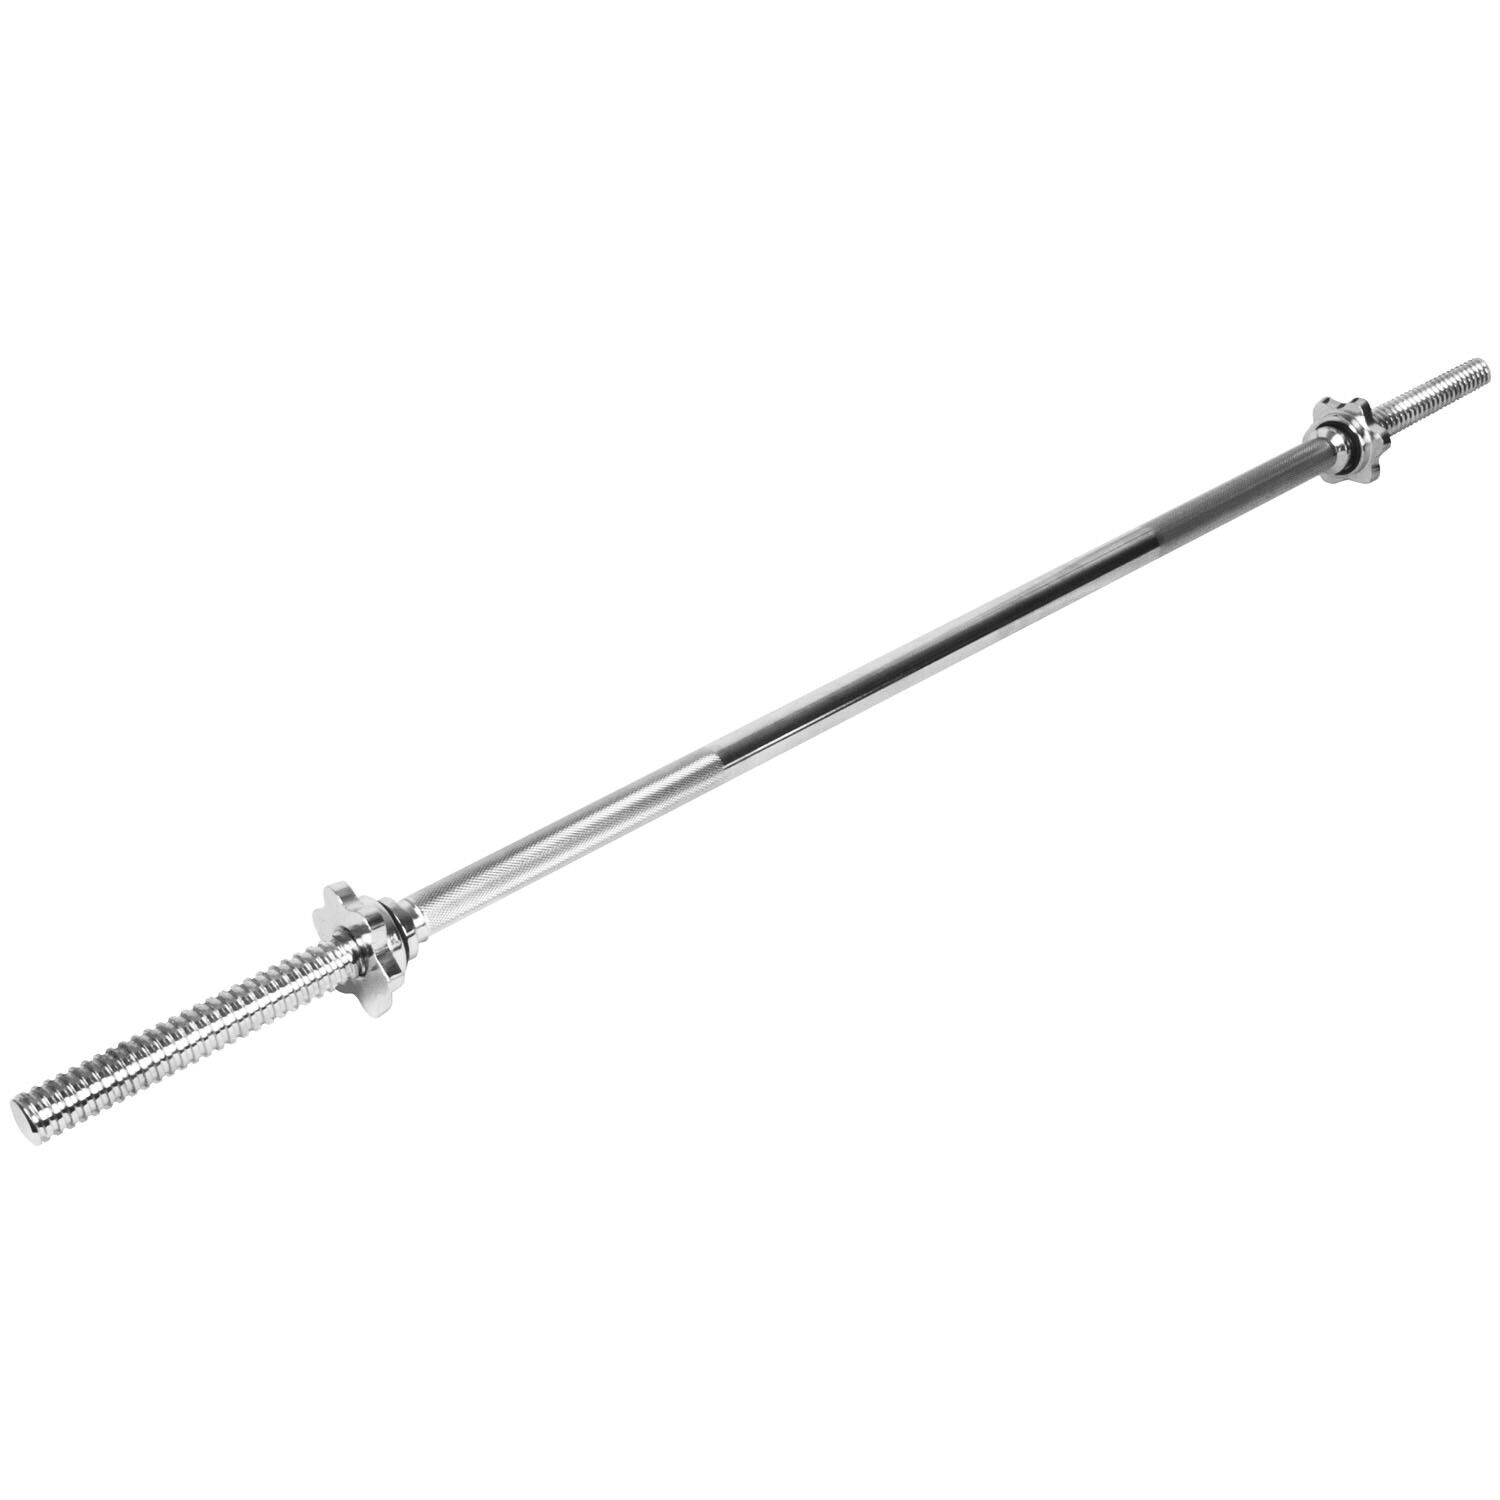 4ft Straight Spinlock Barbell Weightlifting Bar 48" Weightlifting Standard Lift